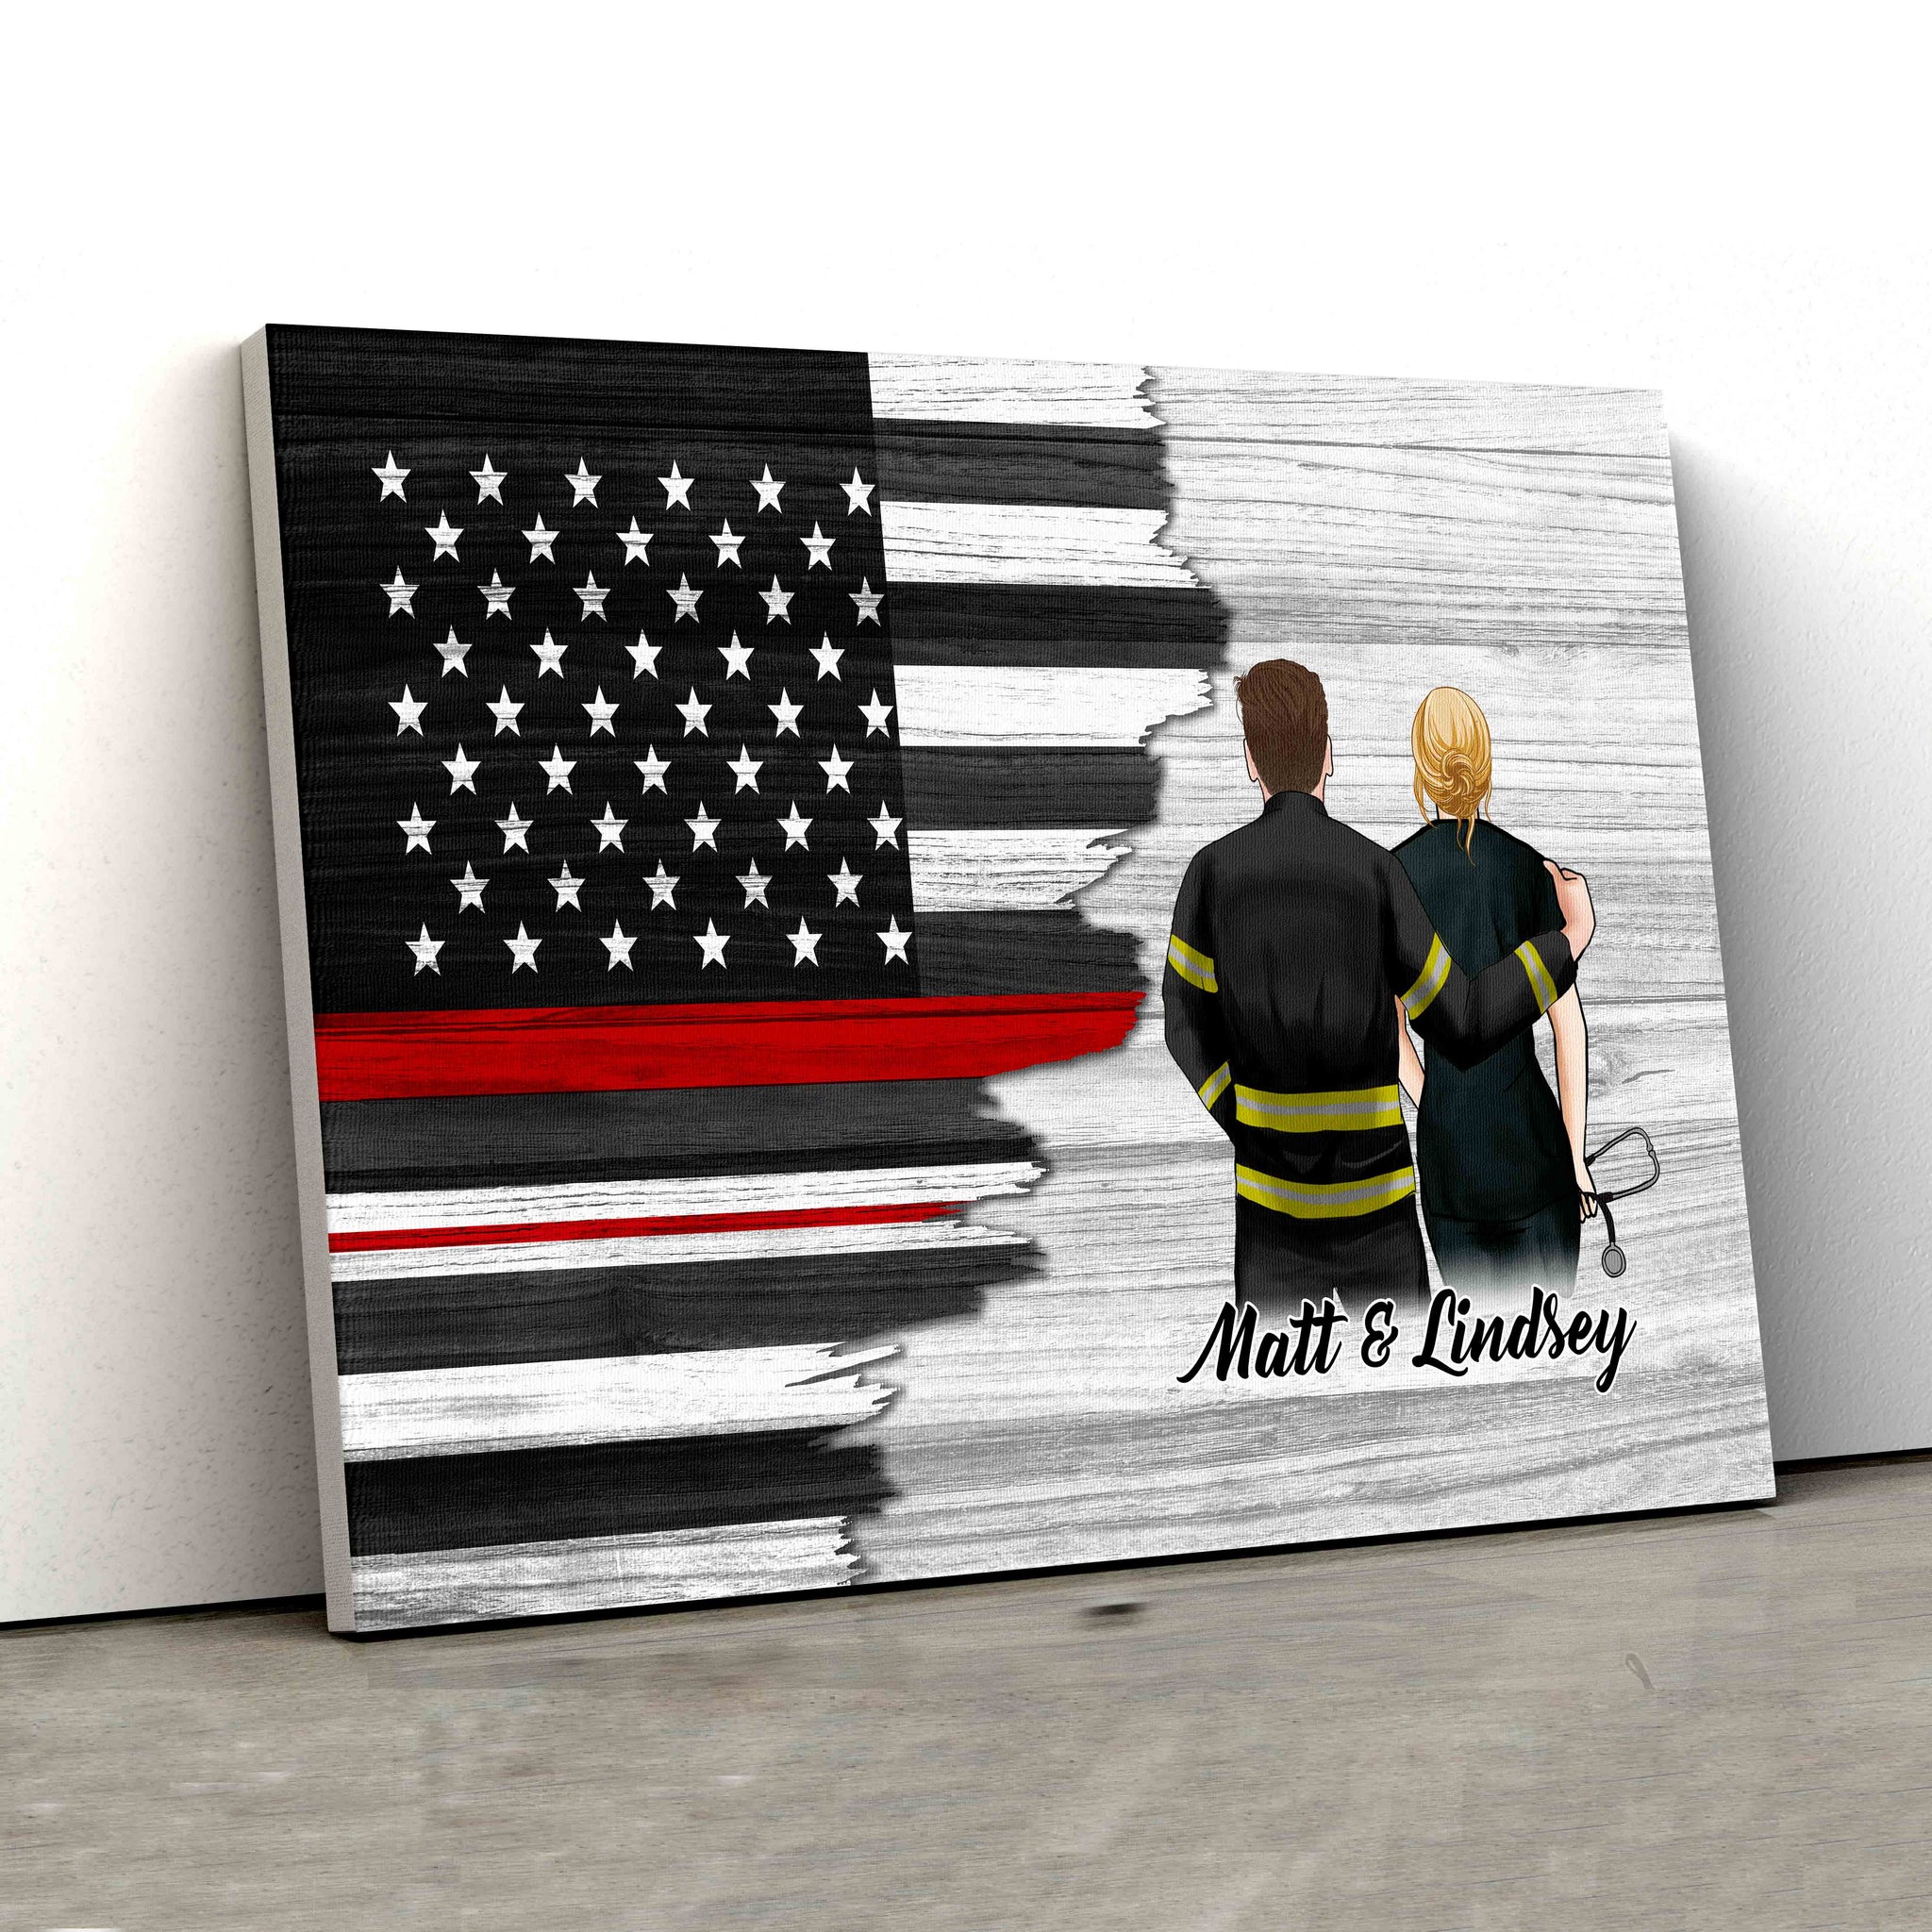 Personalized Name Canvas, American Flag Canvas, Firefighter Canvas, Nurse Canvas, Wall Art Canvas, Gift Canvas